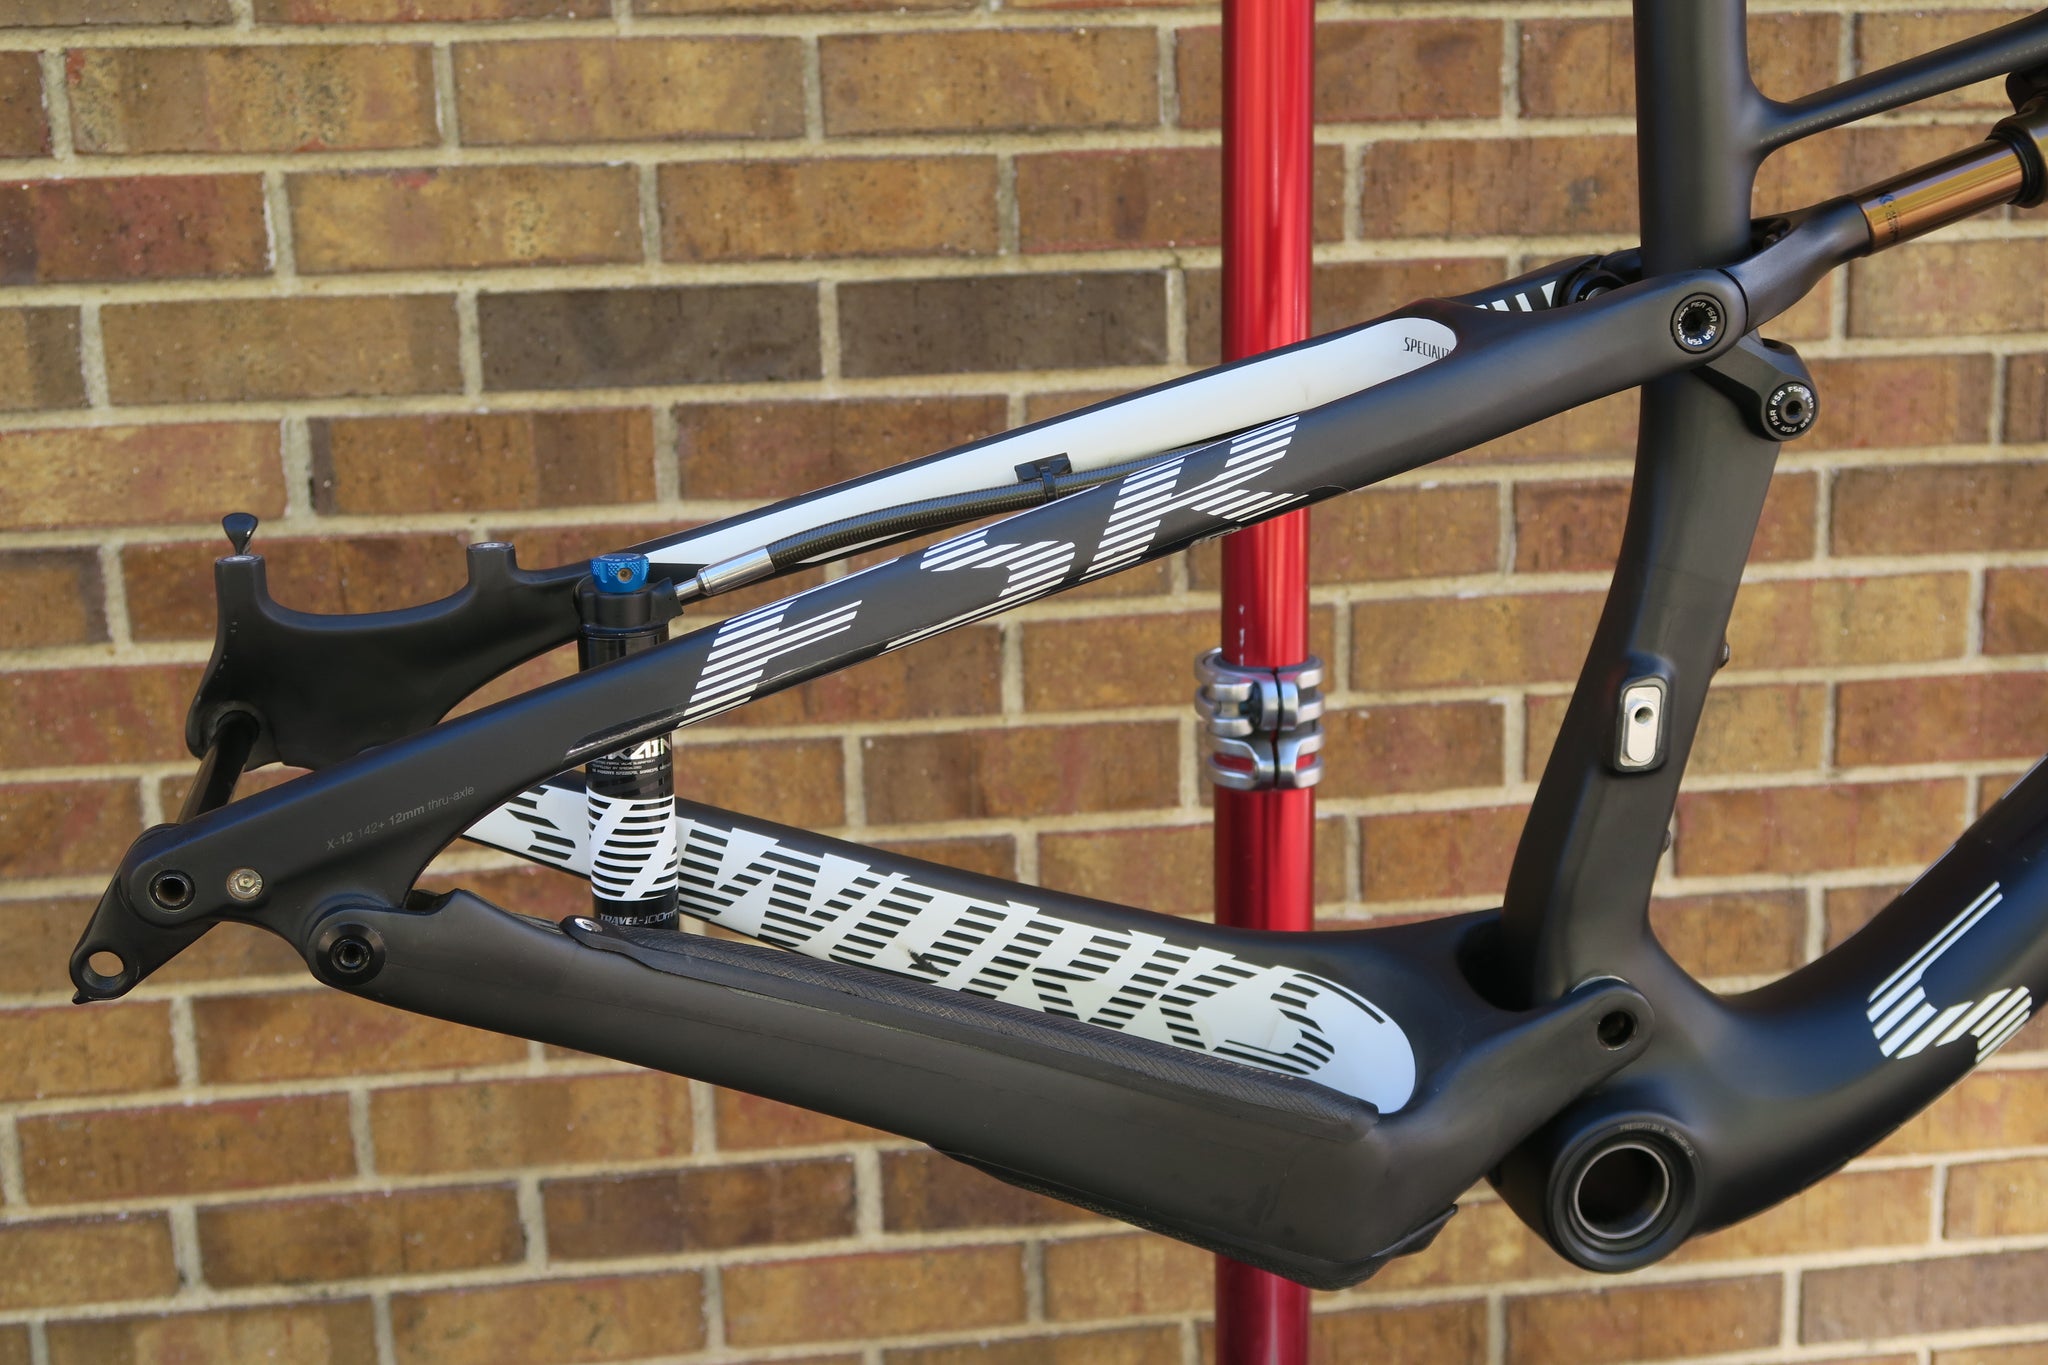 2015 SPECIALIZED S-WORKS EPIC CARBON FRAME 29"